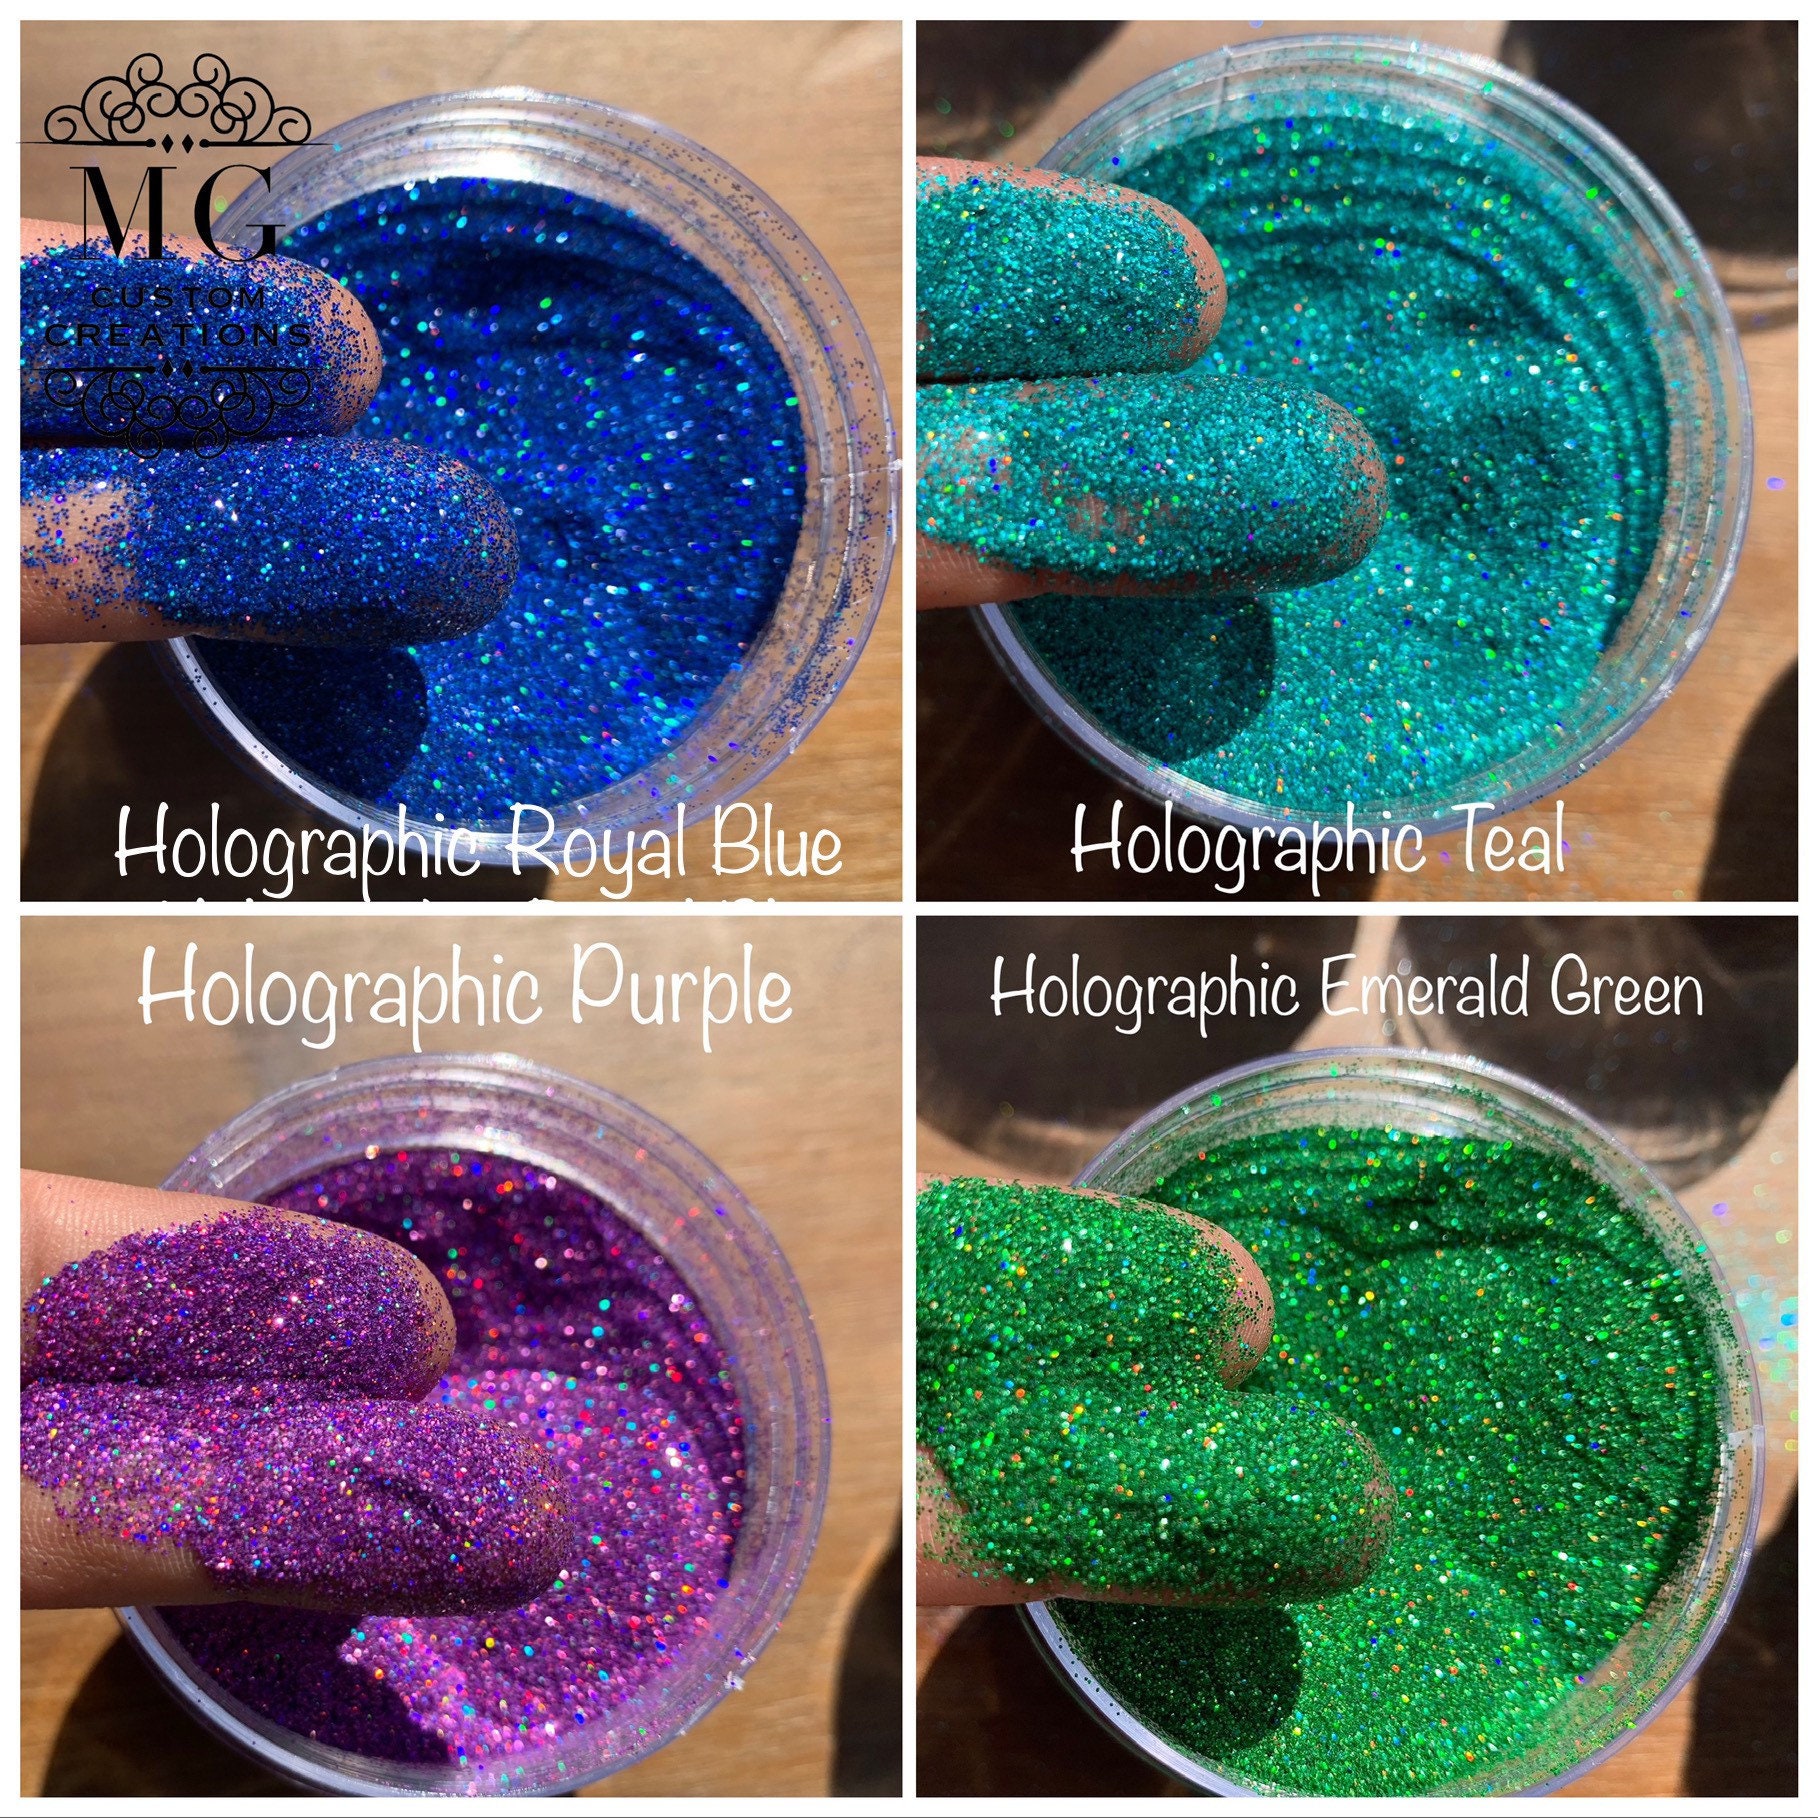 Rolio - Holographic Glitter - Pure Glitter Set - 12 Jars of Cosmetic Grade  Glitter for Resin, Makeup, Face & Body Art, Craft Supplies, Nail Decoration  - Vibrant Set 